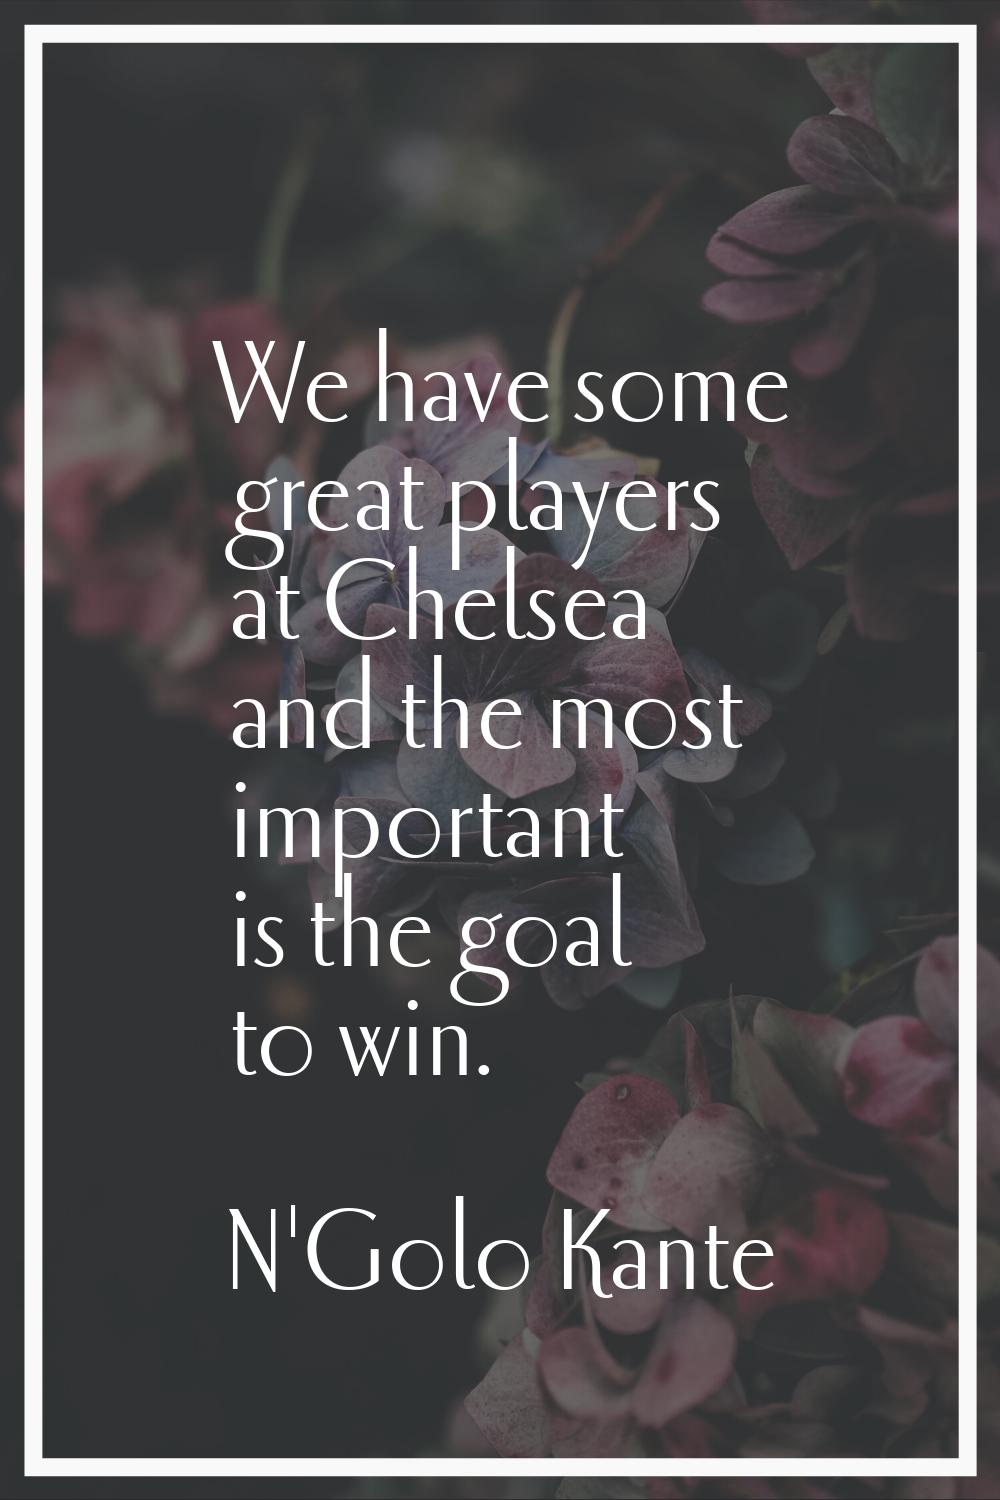 We have some great players at Chelsea and the most important is the goal to win.